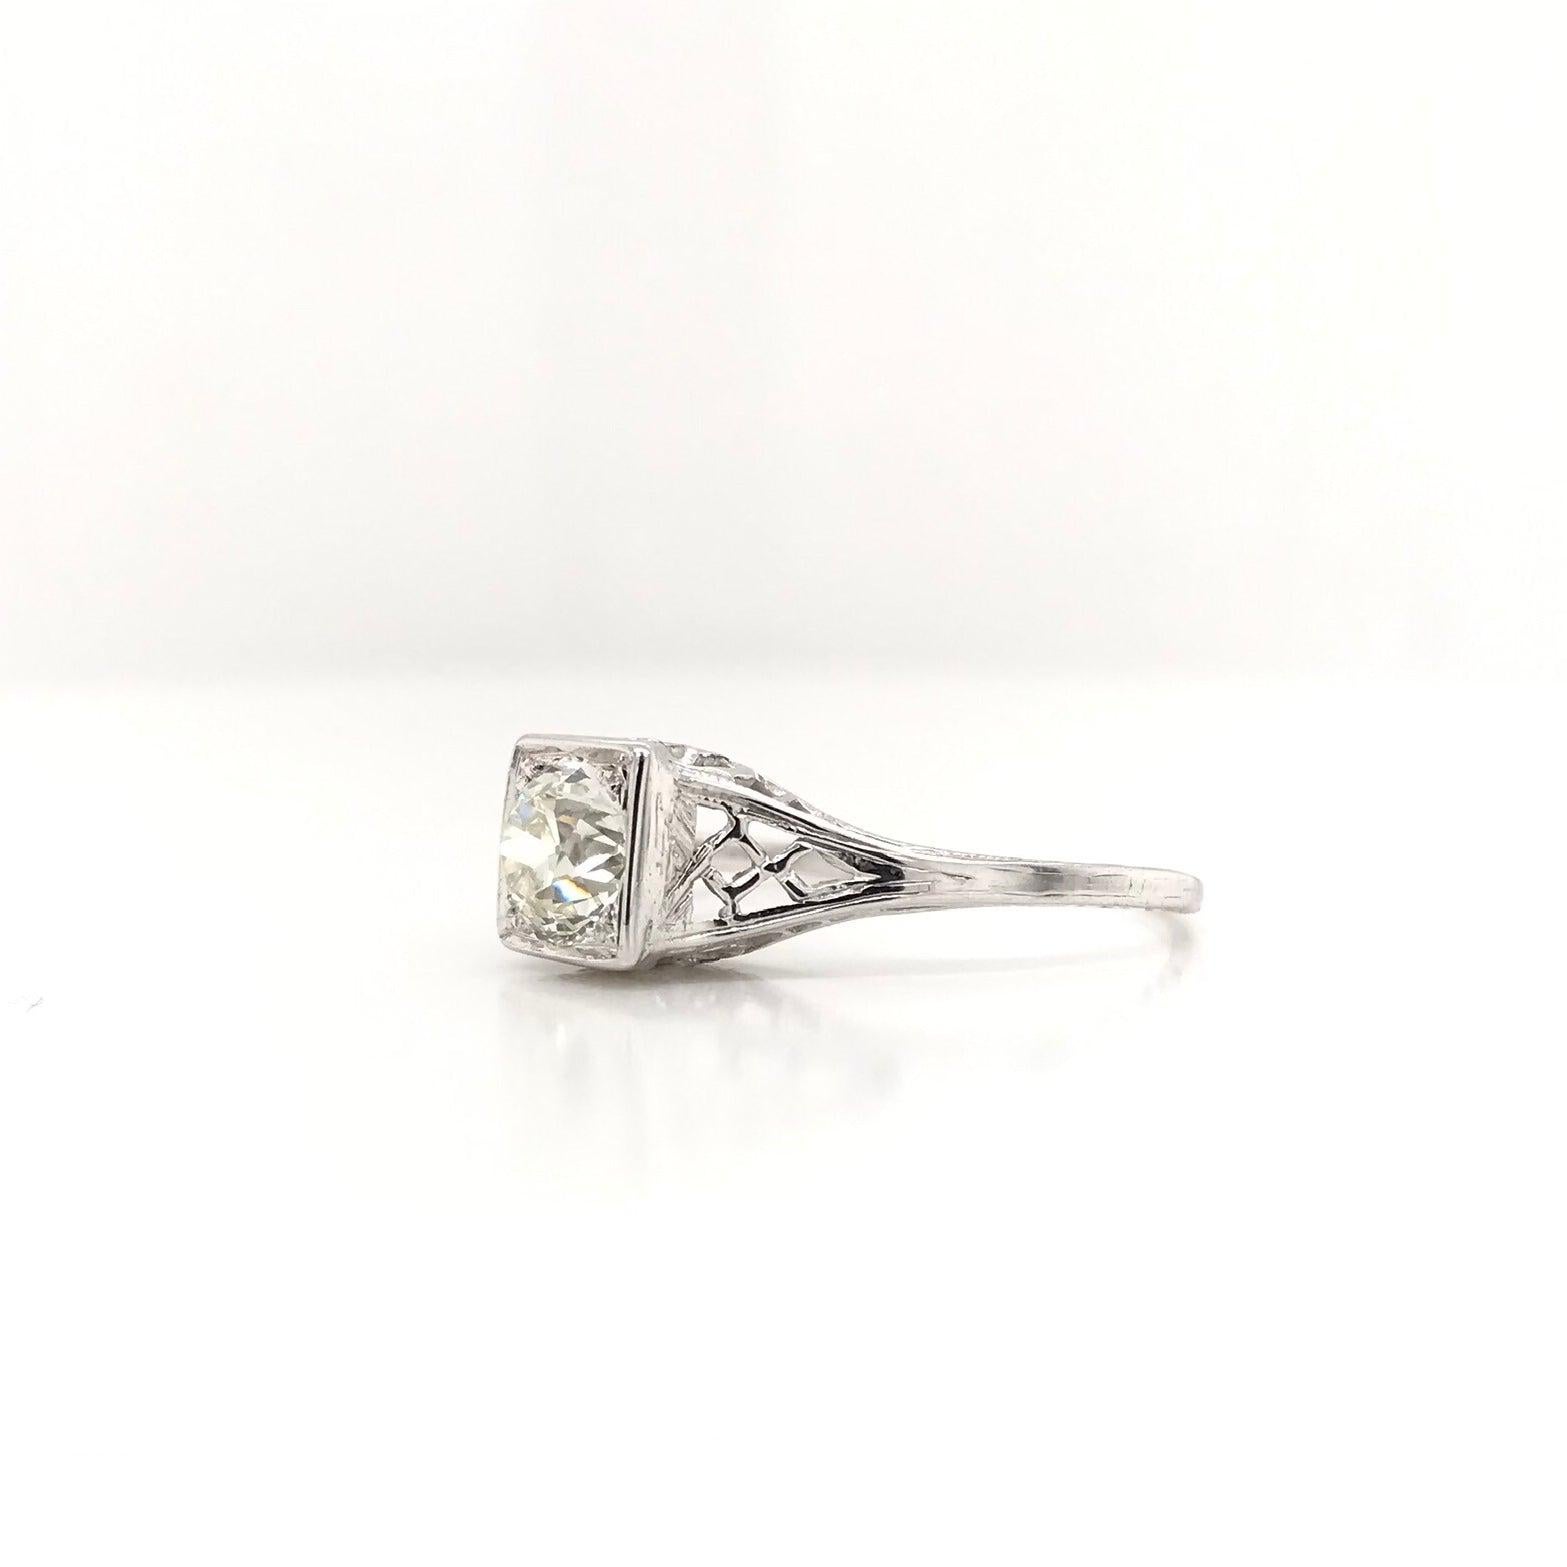 This beautiful antique piece was skillfully handcrafted sometime during the Art Deco design period (1920-1940). The 18K white gold filigree setting features one central diamond. The diamond is an antique Old European cut and measures approximately